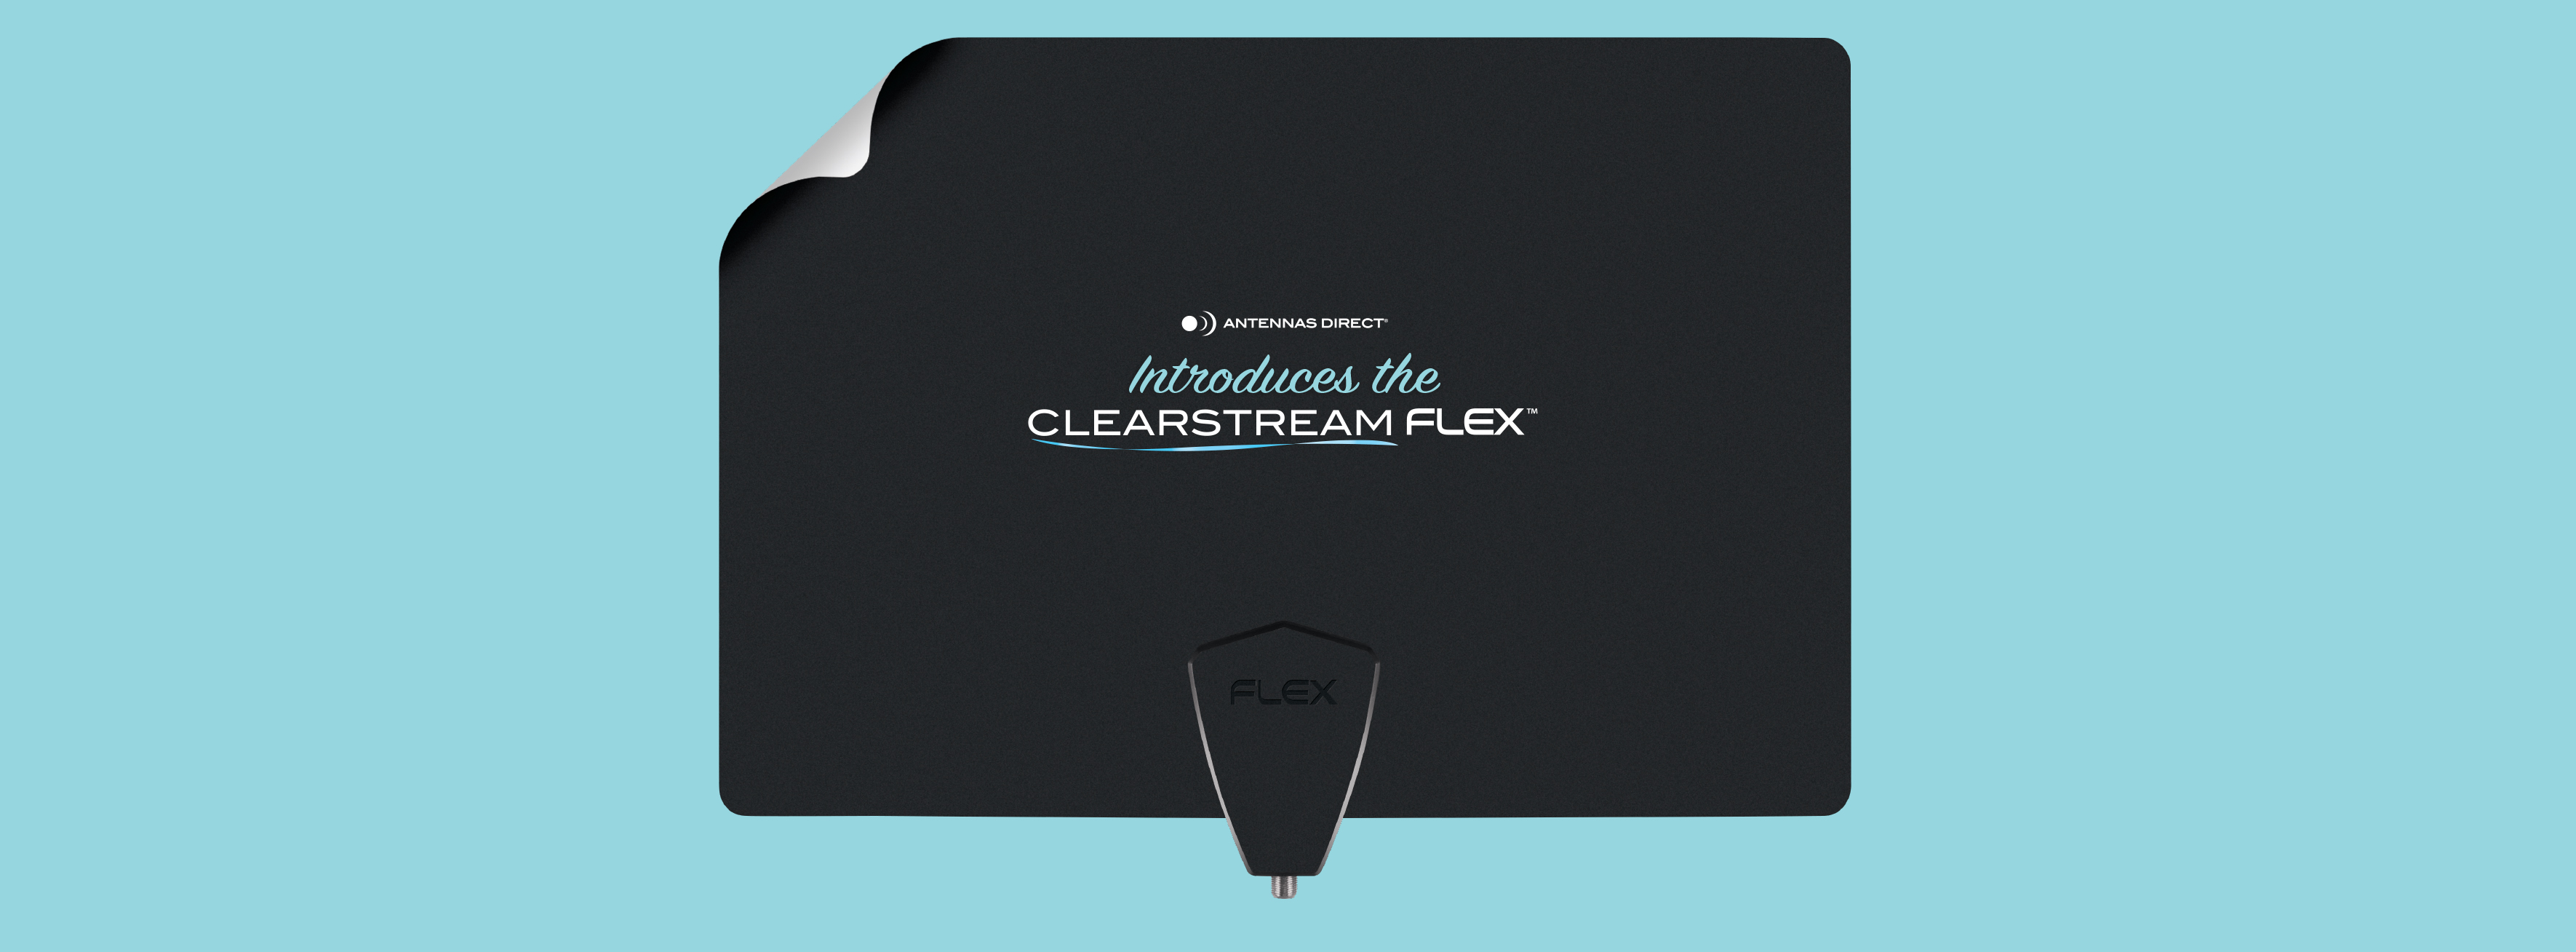 Results image of ClearStream FLEX